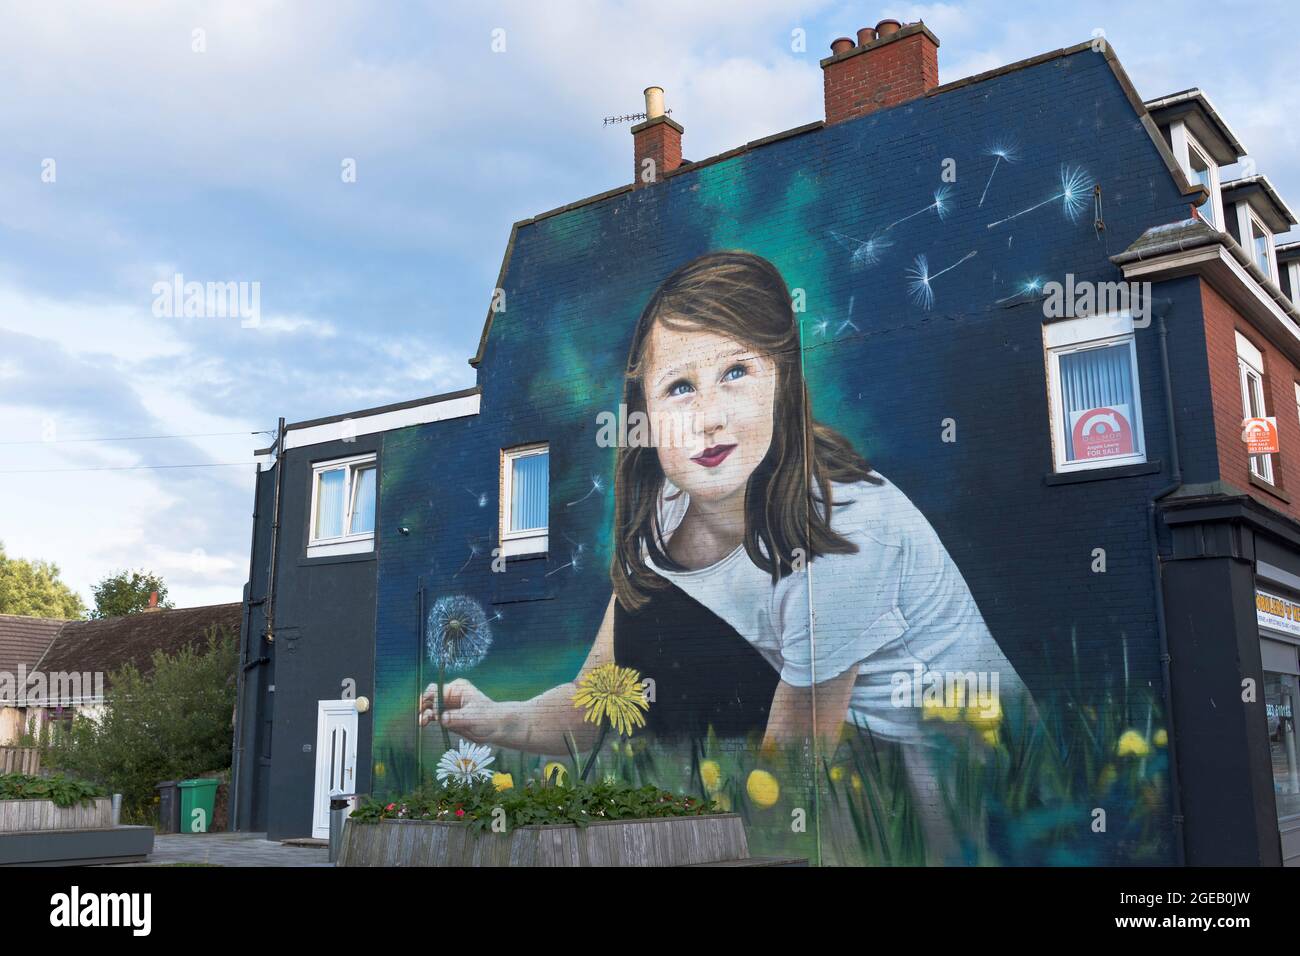 dh High Street Mural COWDENBEATH FIFE Scottish town centre square painting child murals Scotland end of building UK wall art artwork house artist Stock Photo